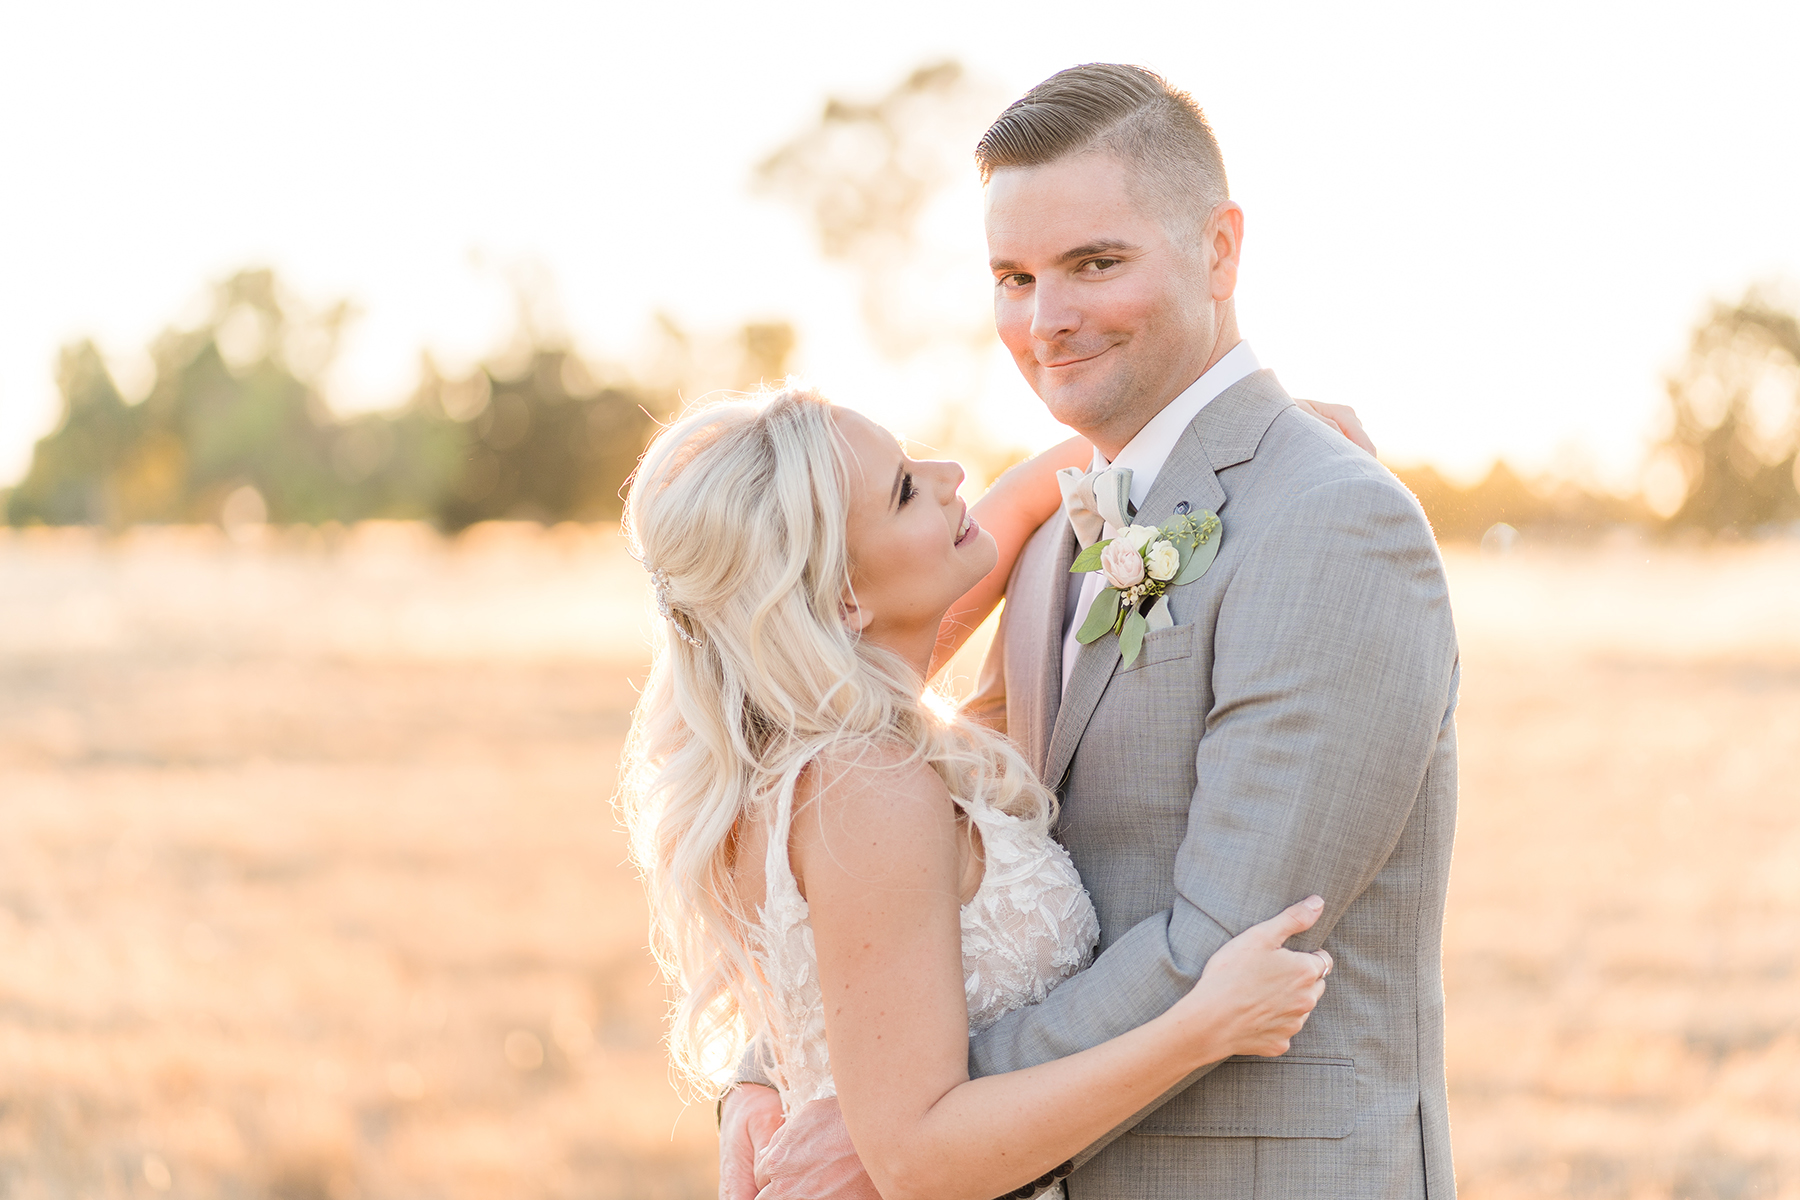 Elk Grove Evergreen Springs Wedding Sunset Bride and Groom Photos by Adrienne and Dani Photography